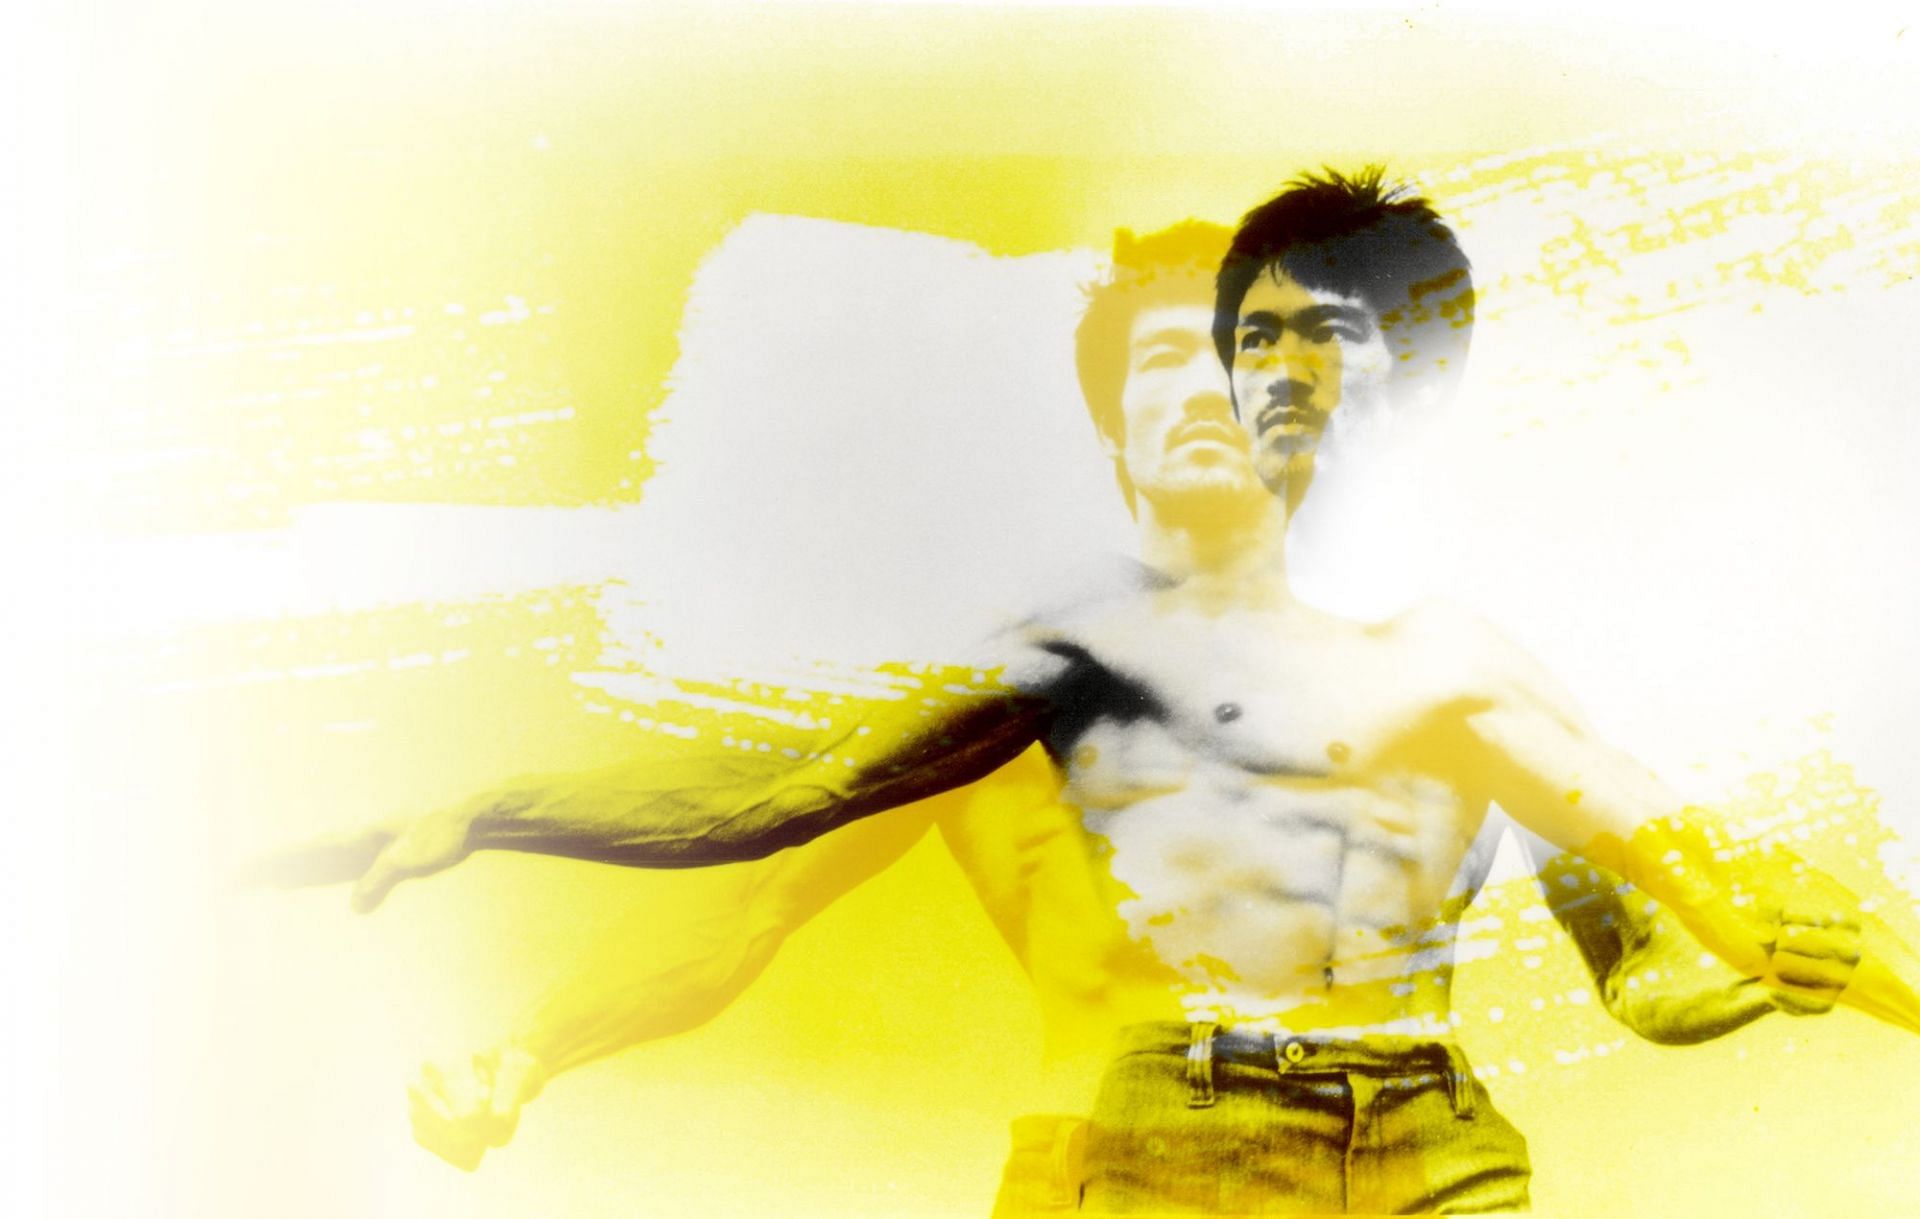 Bruce Lee used a variety of stretching exercises. (Pic via: brucelee.com)